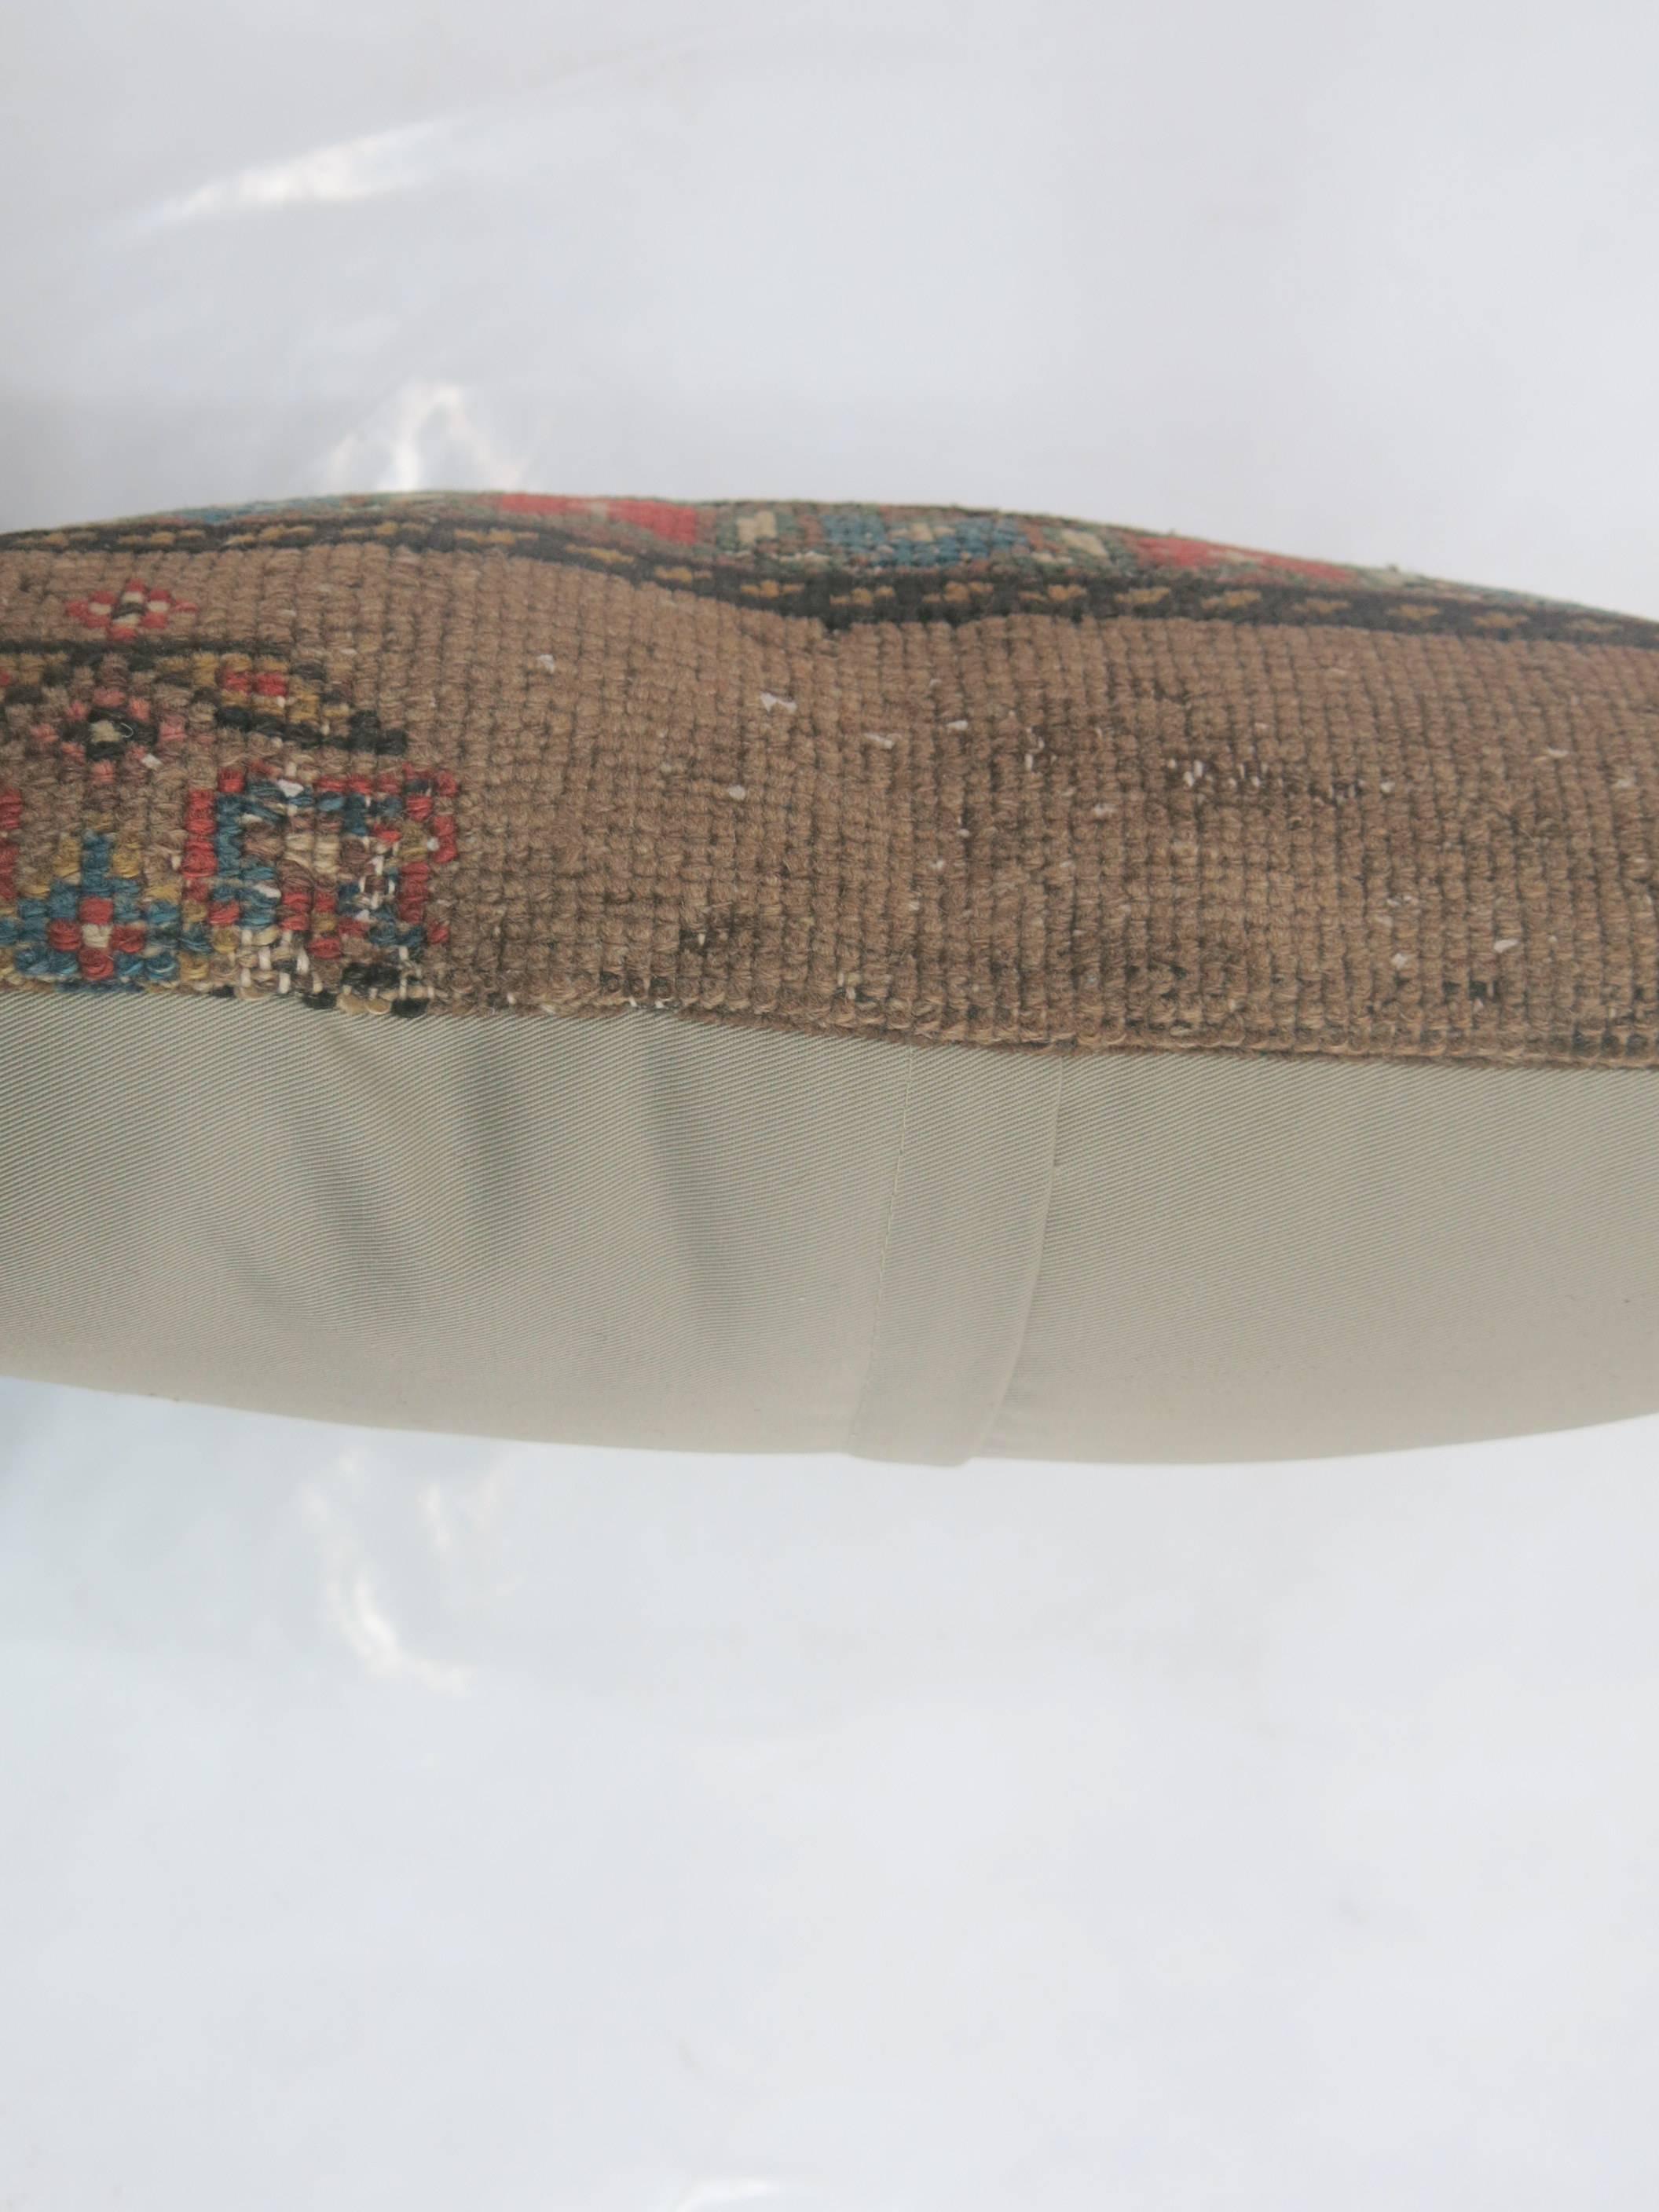 Pillow made from a 19th century antique Persian Serab rug with cotton back. Zipper closure.

17'' x 20'